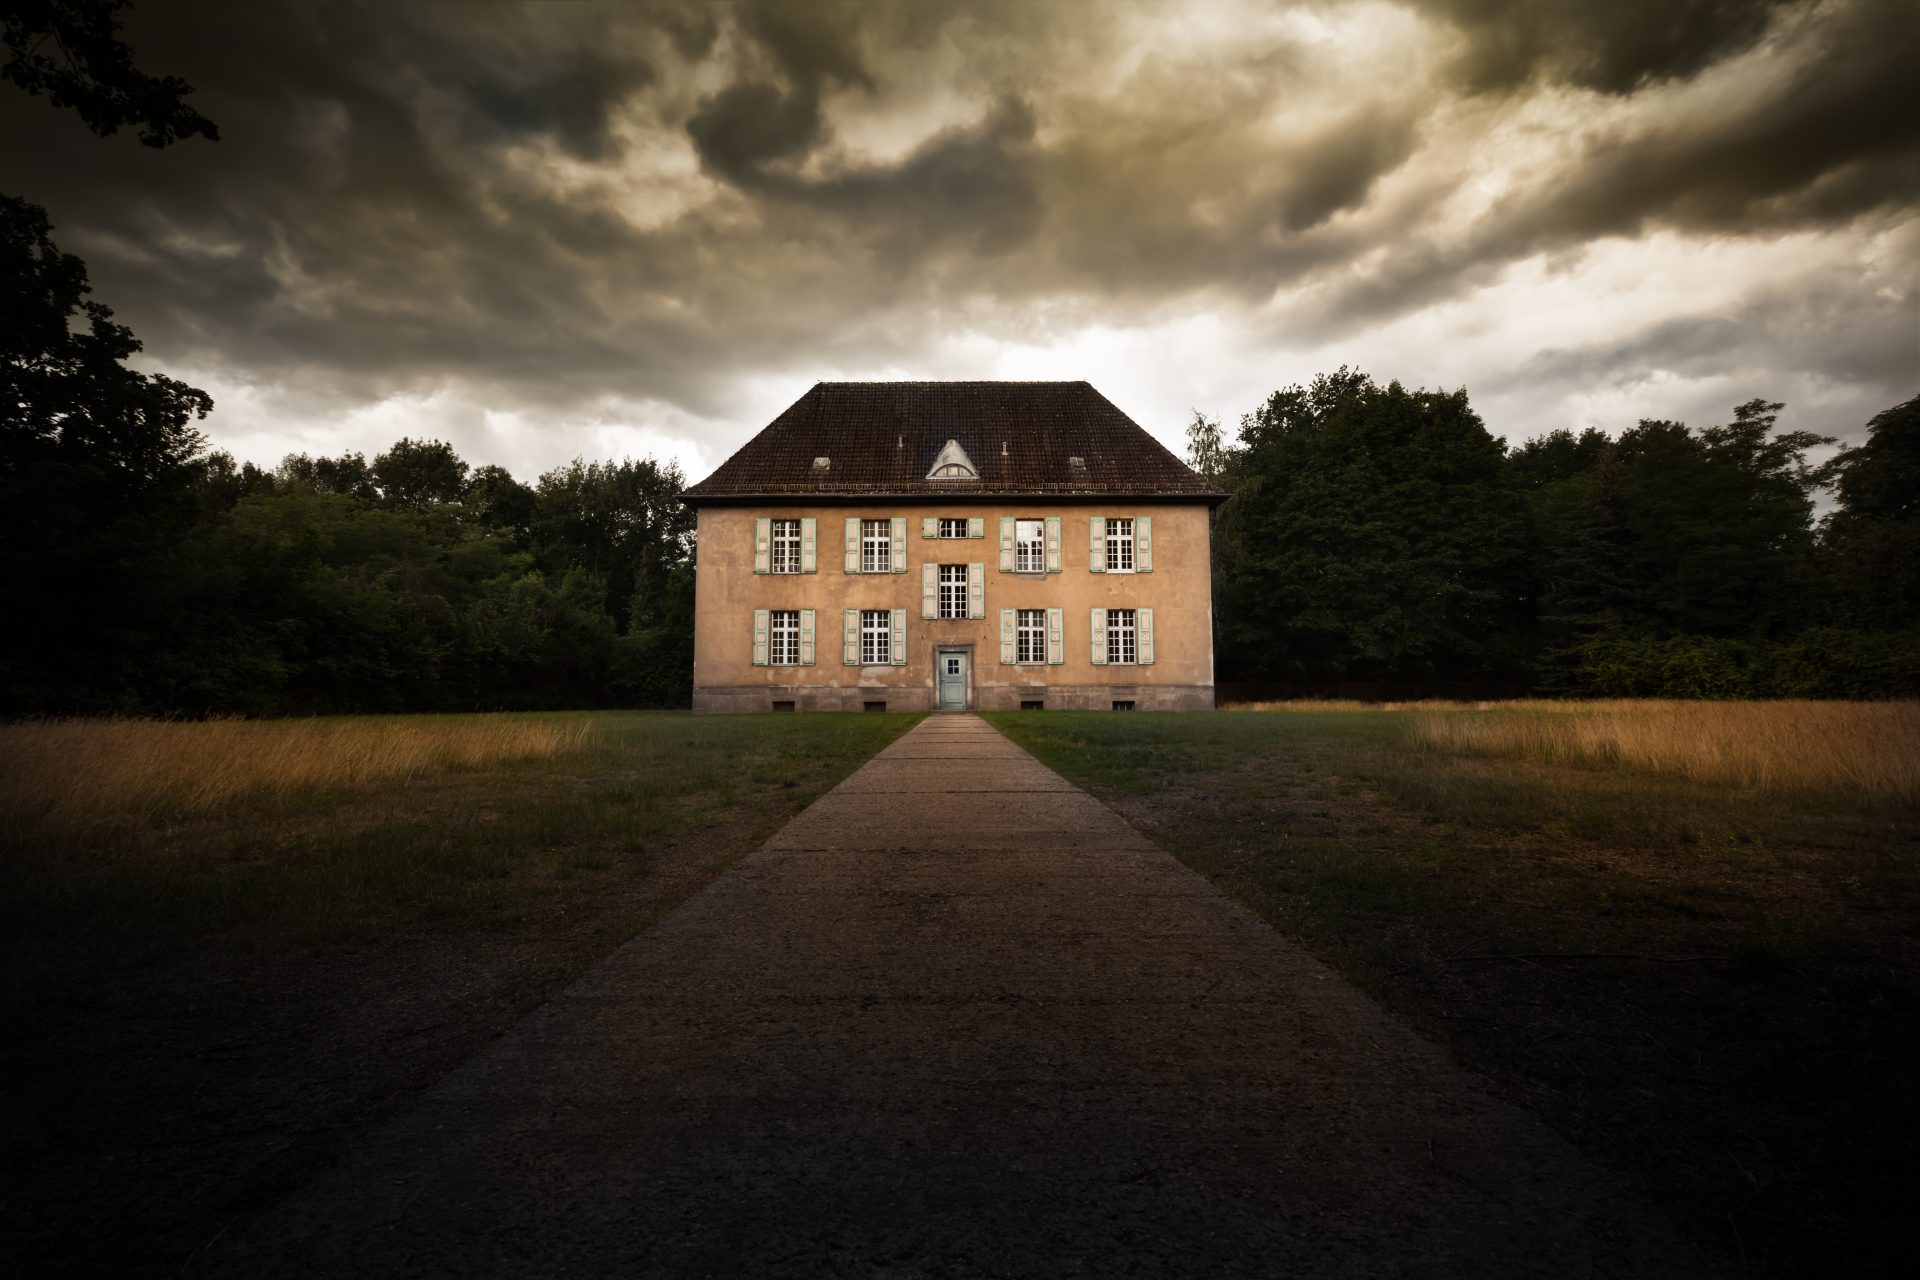 Unreal estate: This is how a haunted house can affect property values